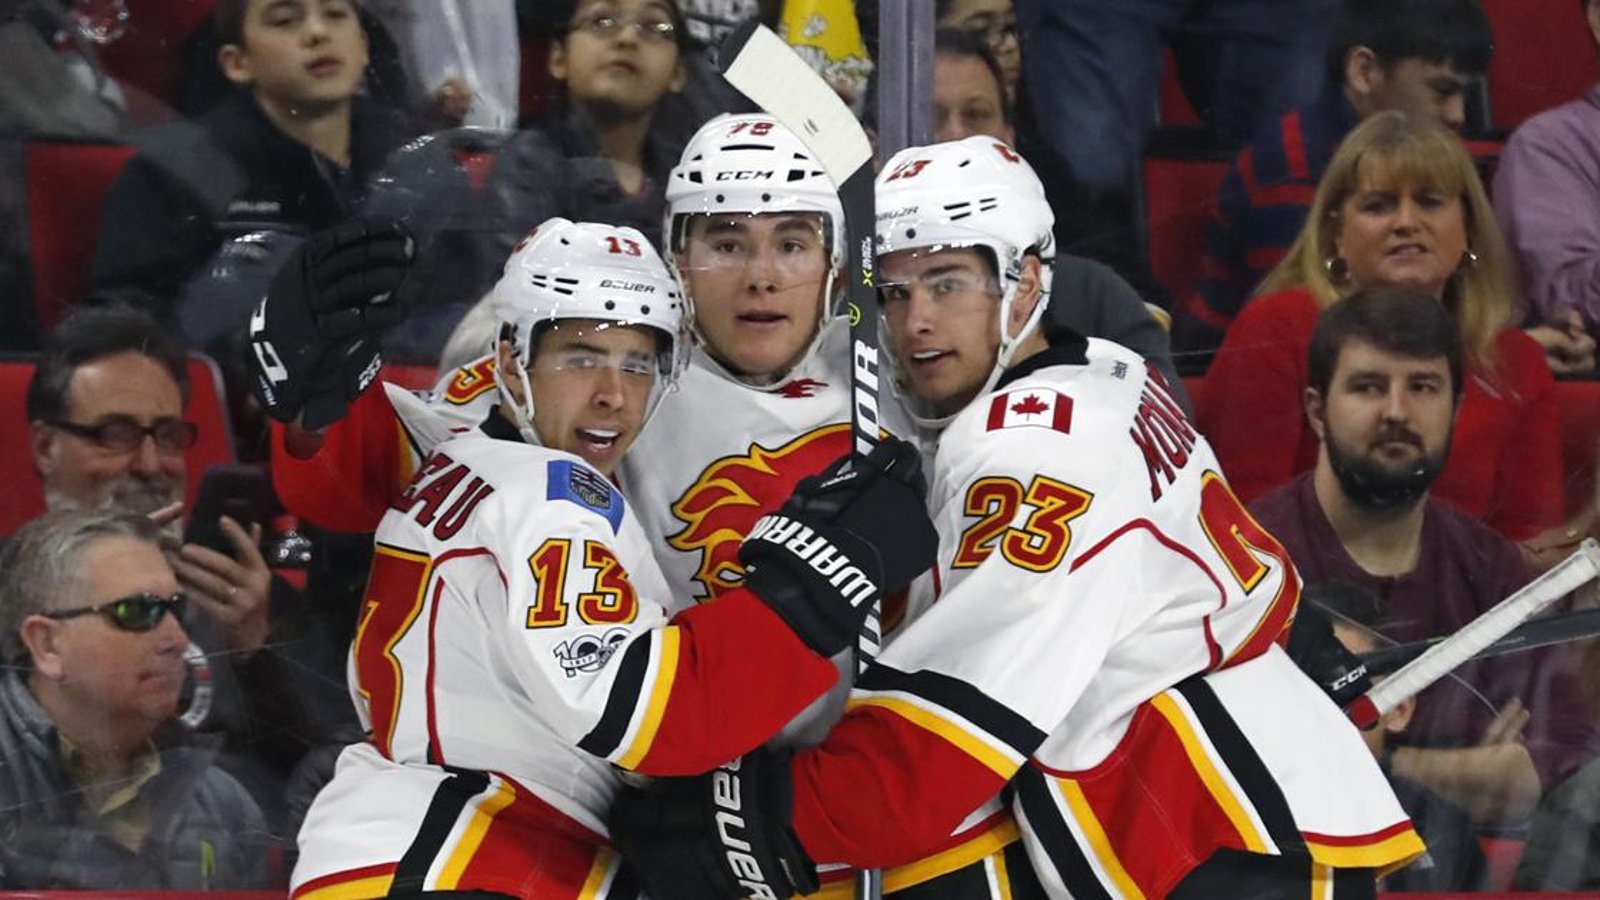 The redemption story of Micheal Ferland.